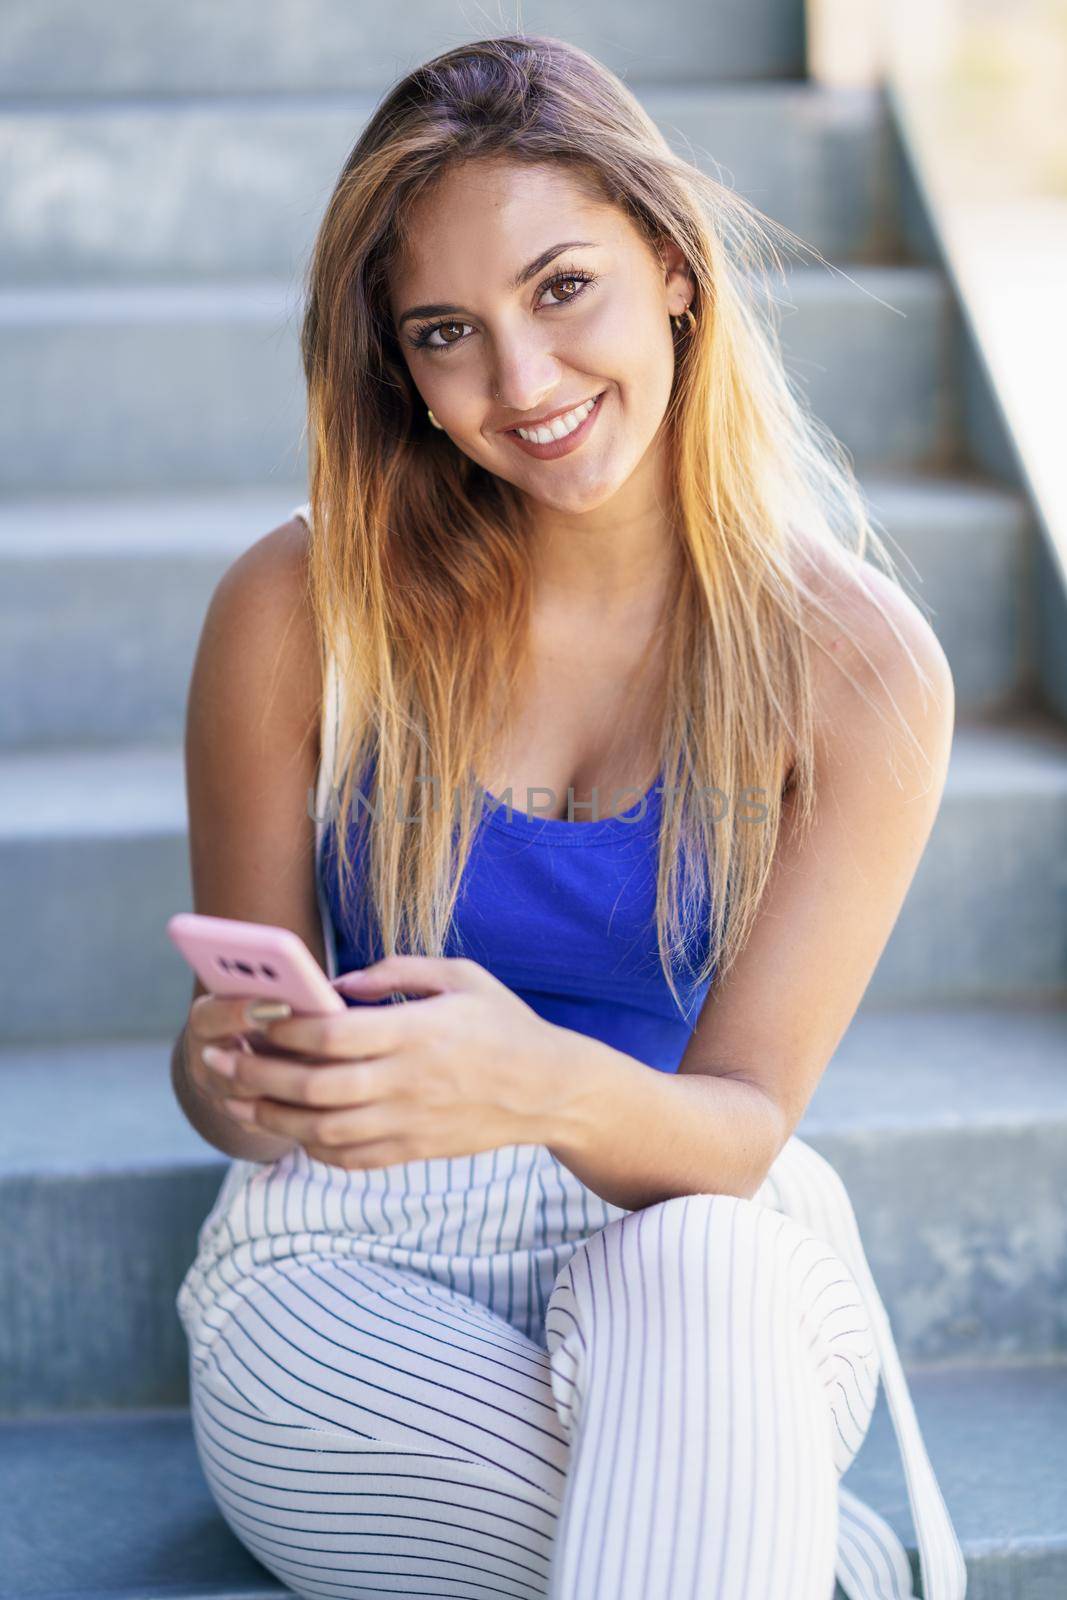 Young female using smartphone wearing casual clothes. Girl sitting outdoors.